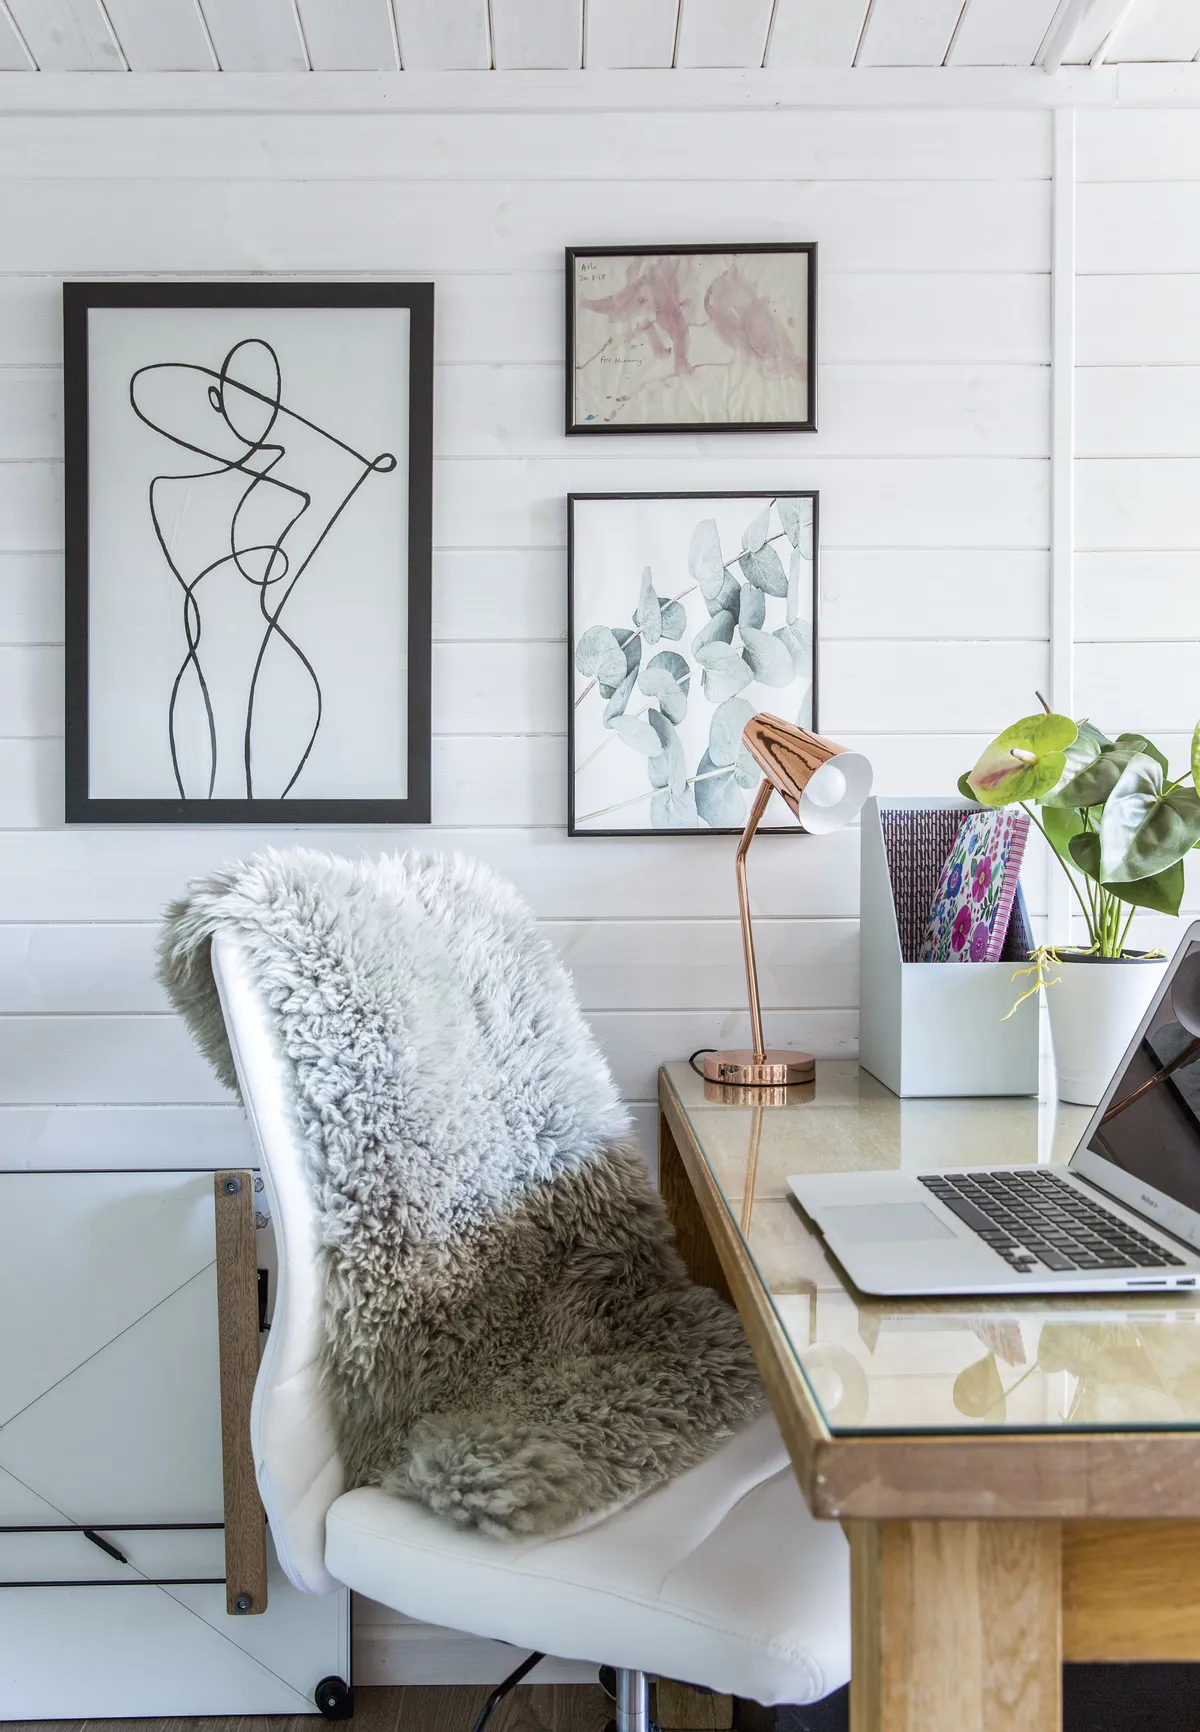 It’s important to have a good chair when working from home and Lisa found these elegant white leather designs from Wayfair. ‘I’m surprised just how comfy they are,’ she says. ‘I threw a couple of faux furs over the seats for extra warmth as the days got chillier’